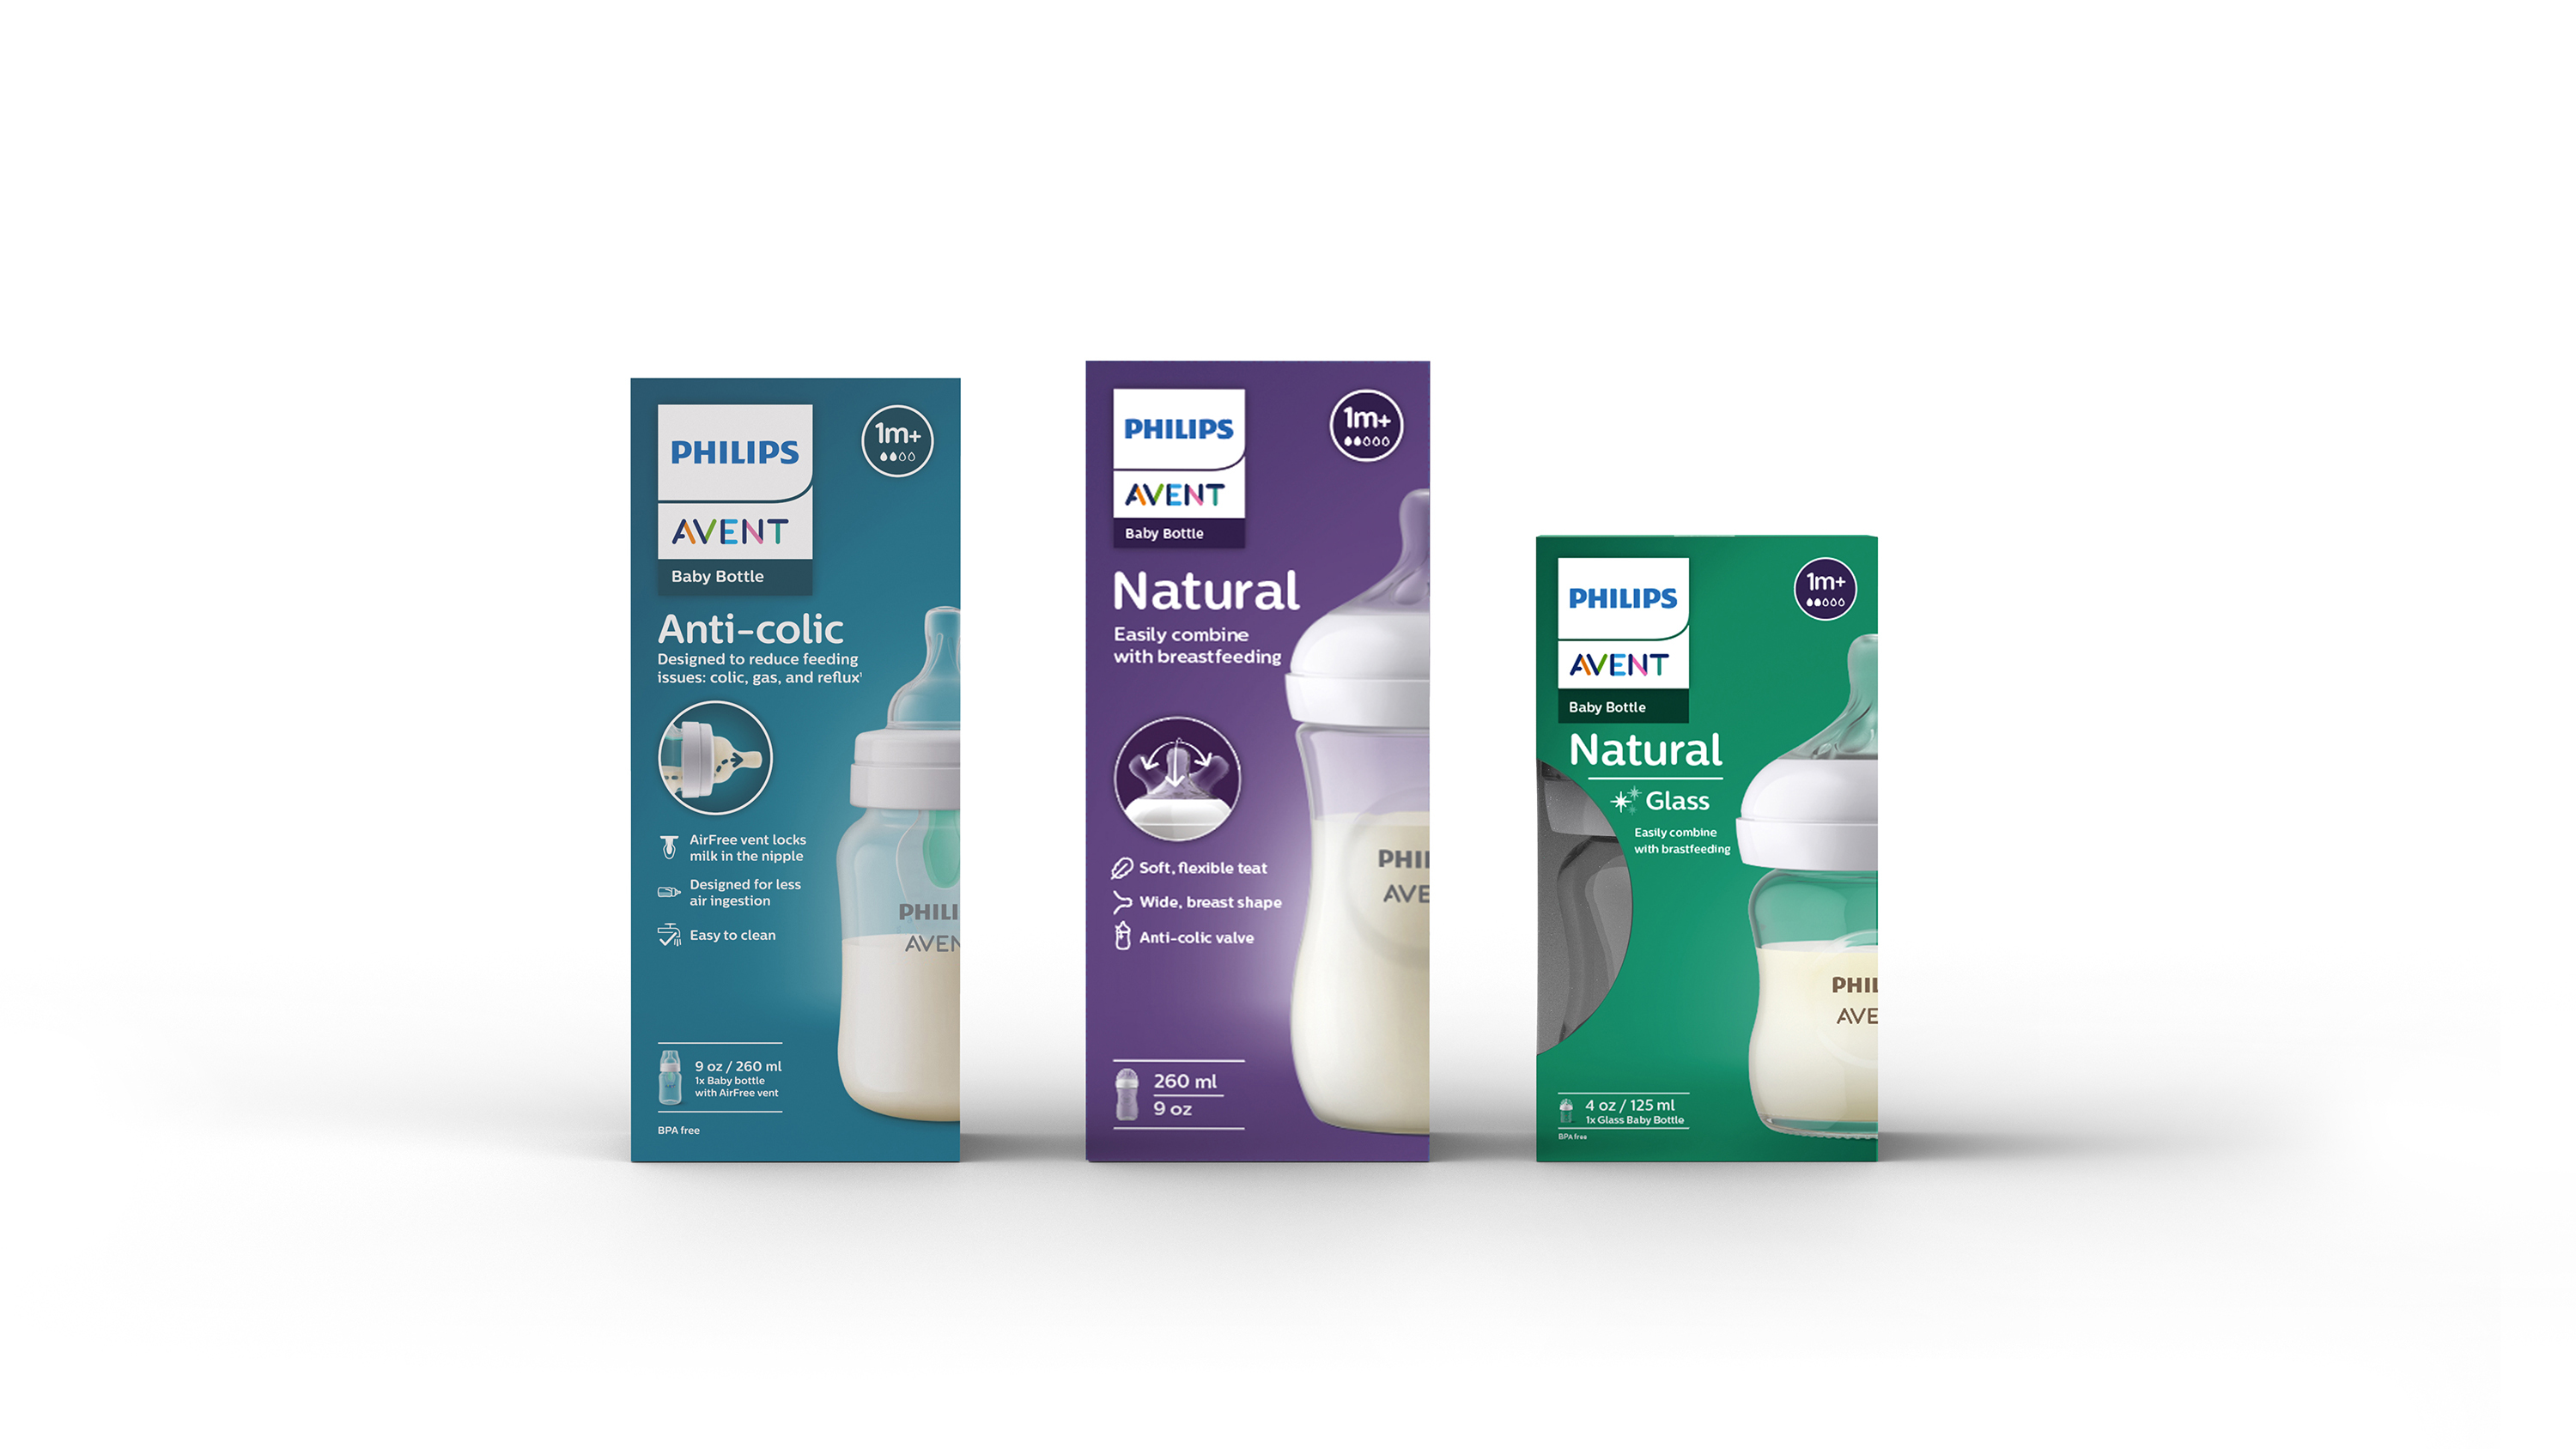 Philips Avent packaging design system